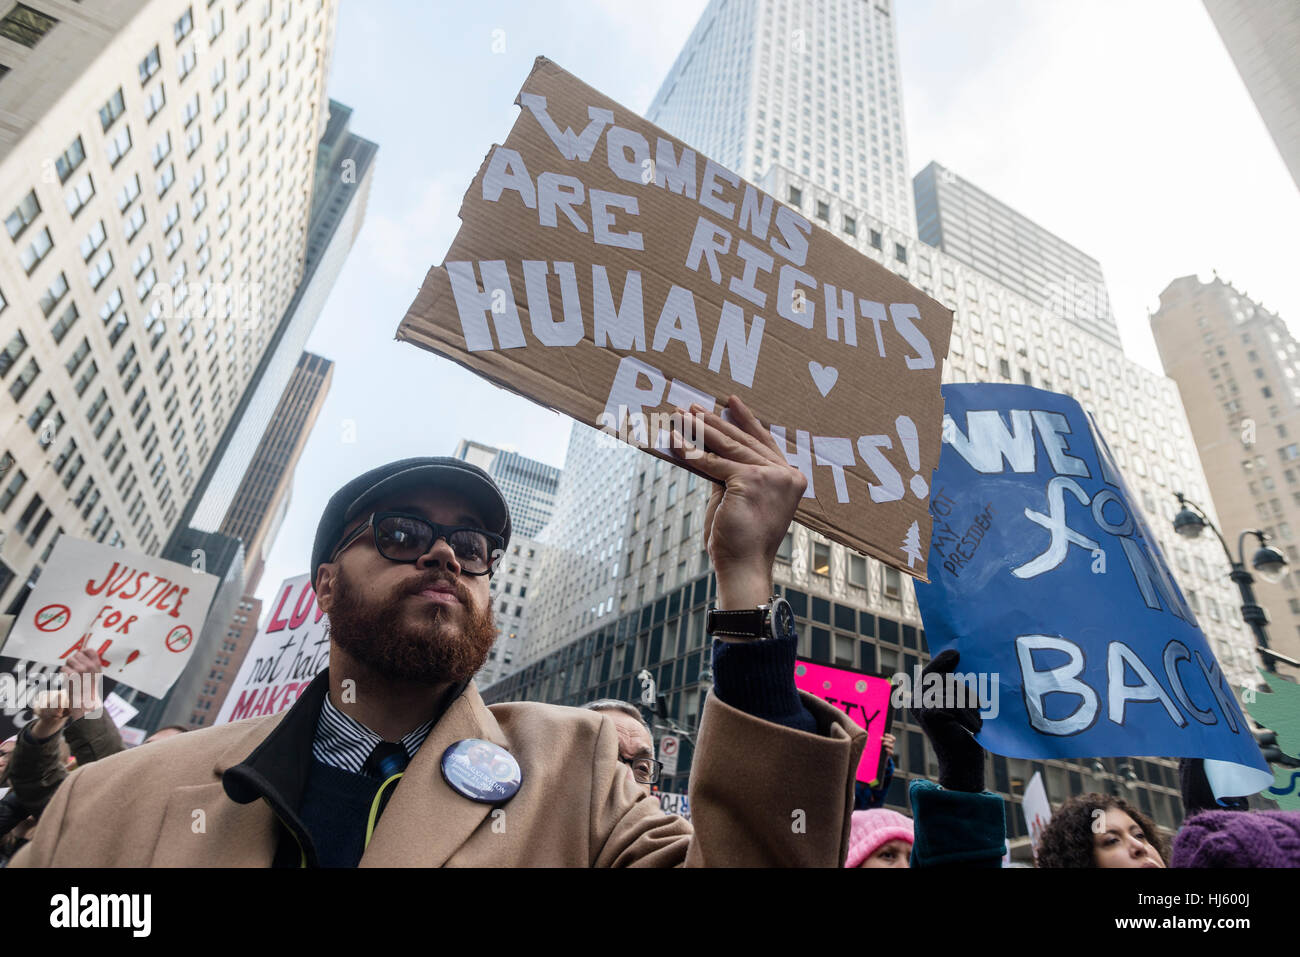 New York, USA 21 Jan 2017 - An estimated 400 to 500 thousand protesters marched from Dag Hammarskjöld Plaza, at the UN, to Trump Tower to protest against President Donald Trump on his first day in office. ©Stacy Walsh Rosenstock/Alamy Live News Stock Photo